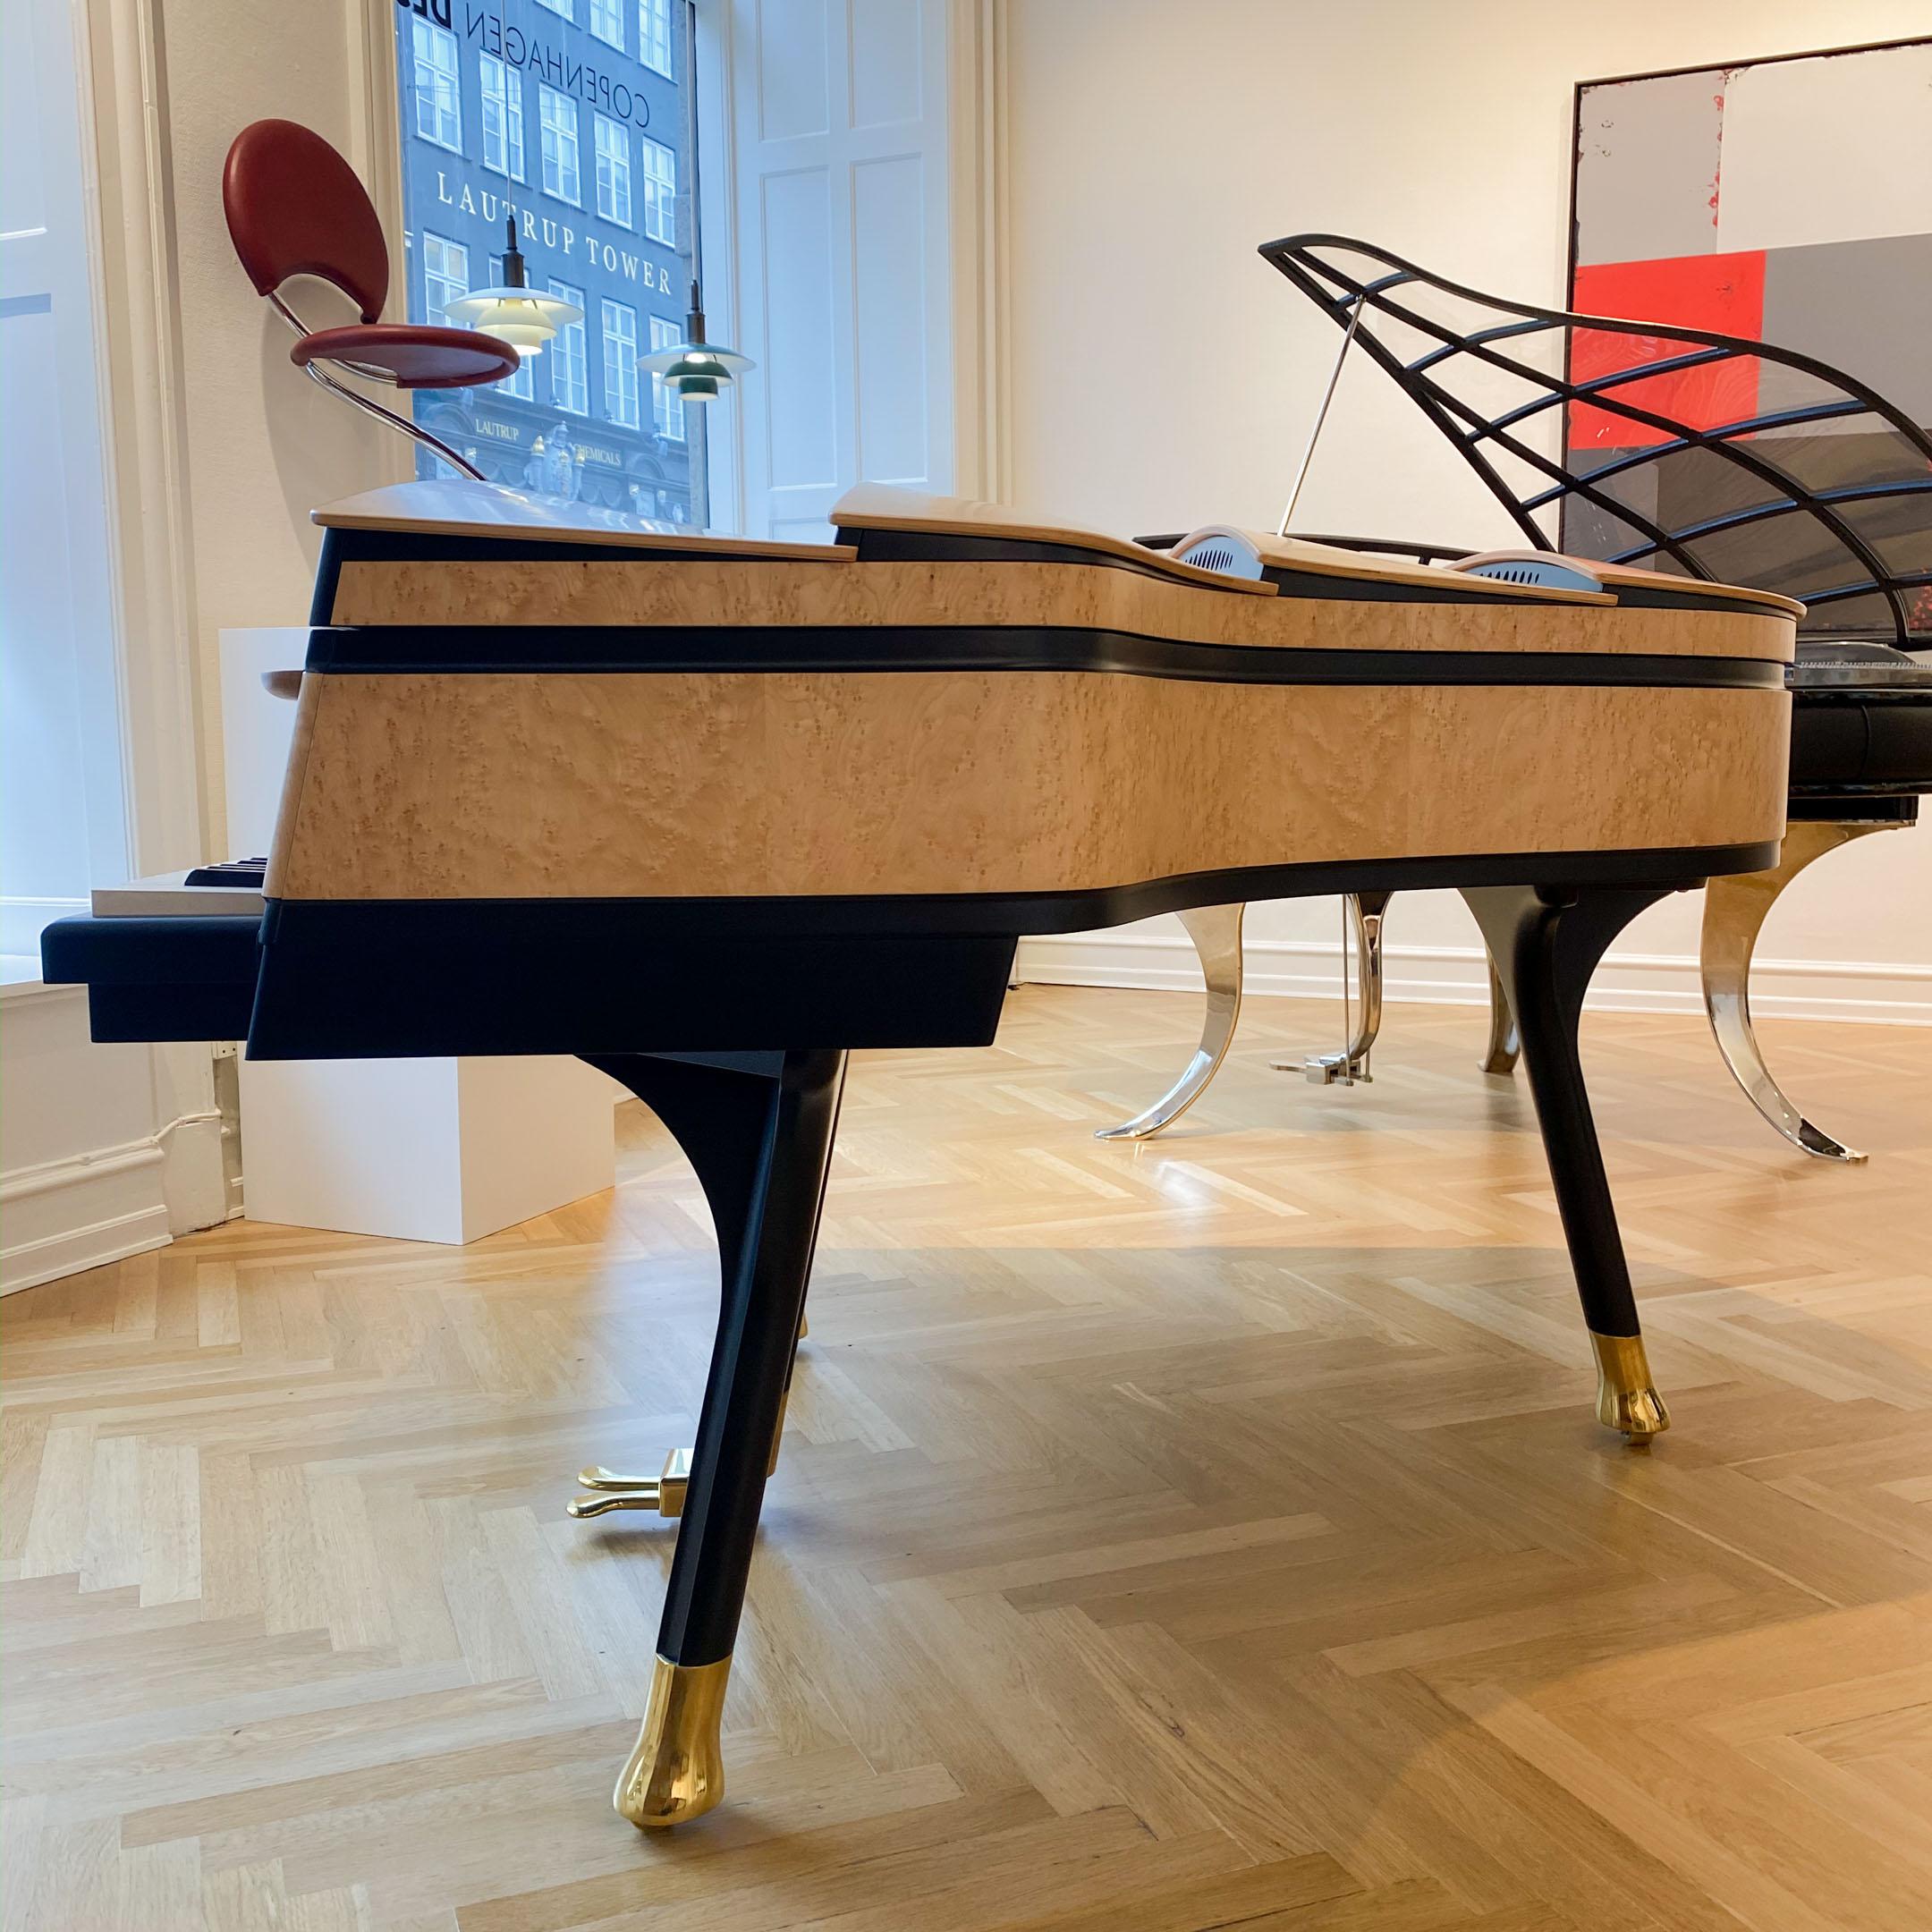 PH Bow Grand Piano, Maple Birch with Brass Details, Modern, Sculptural In Excellent Condition For Sale In Copenhagen, DK